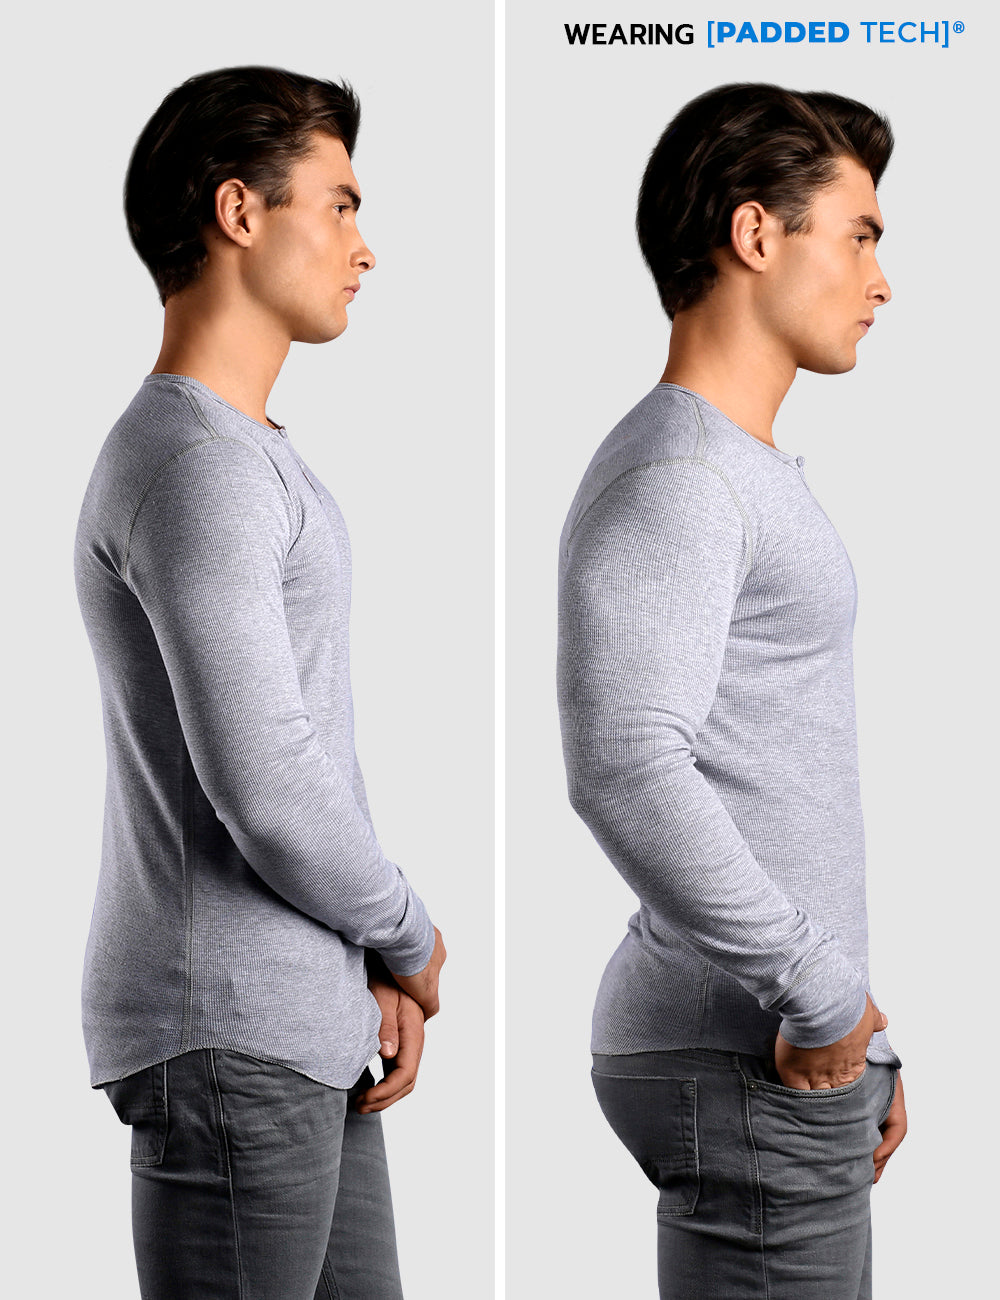 Padded Muscle T-Shirt Went Viral & I Dont Know Why